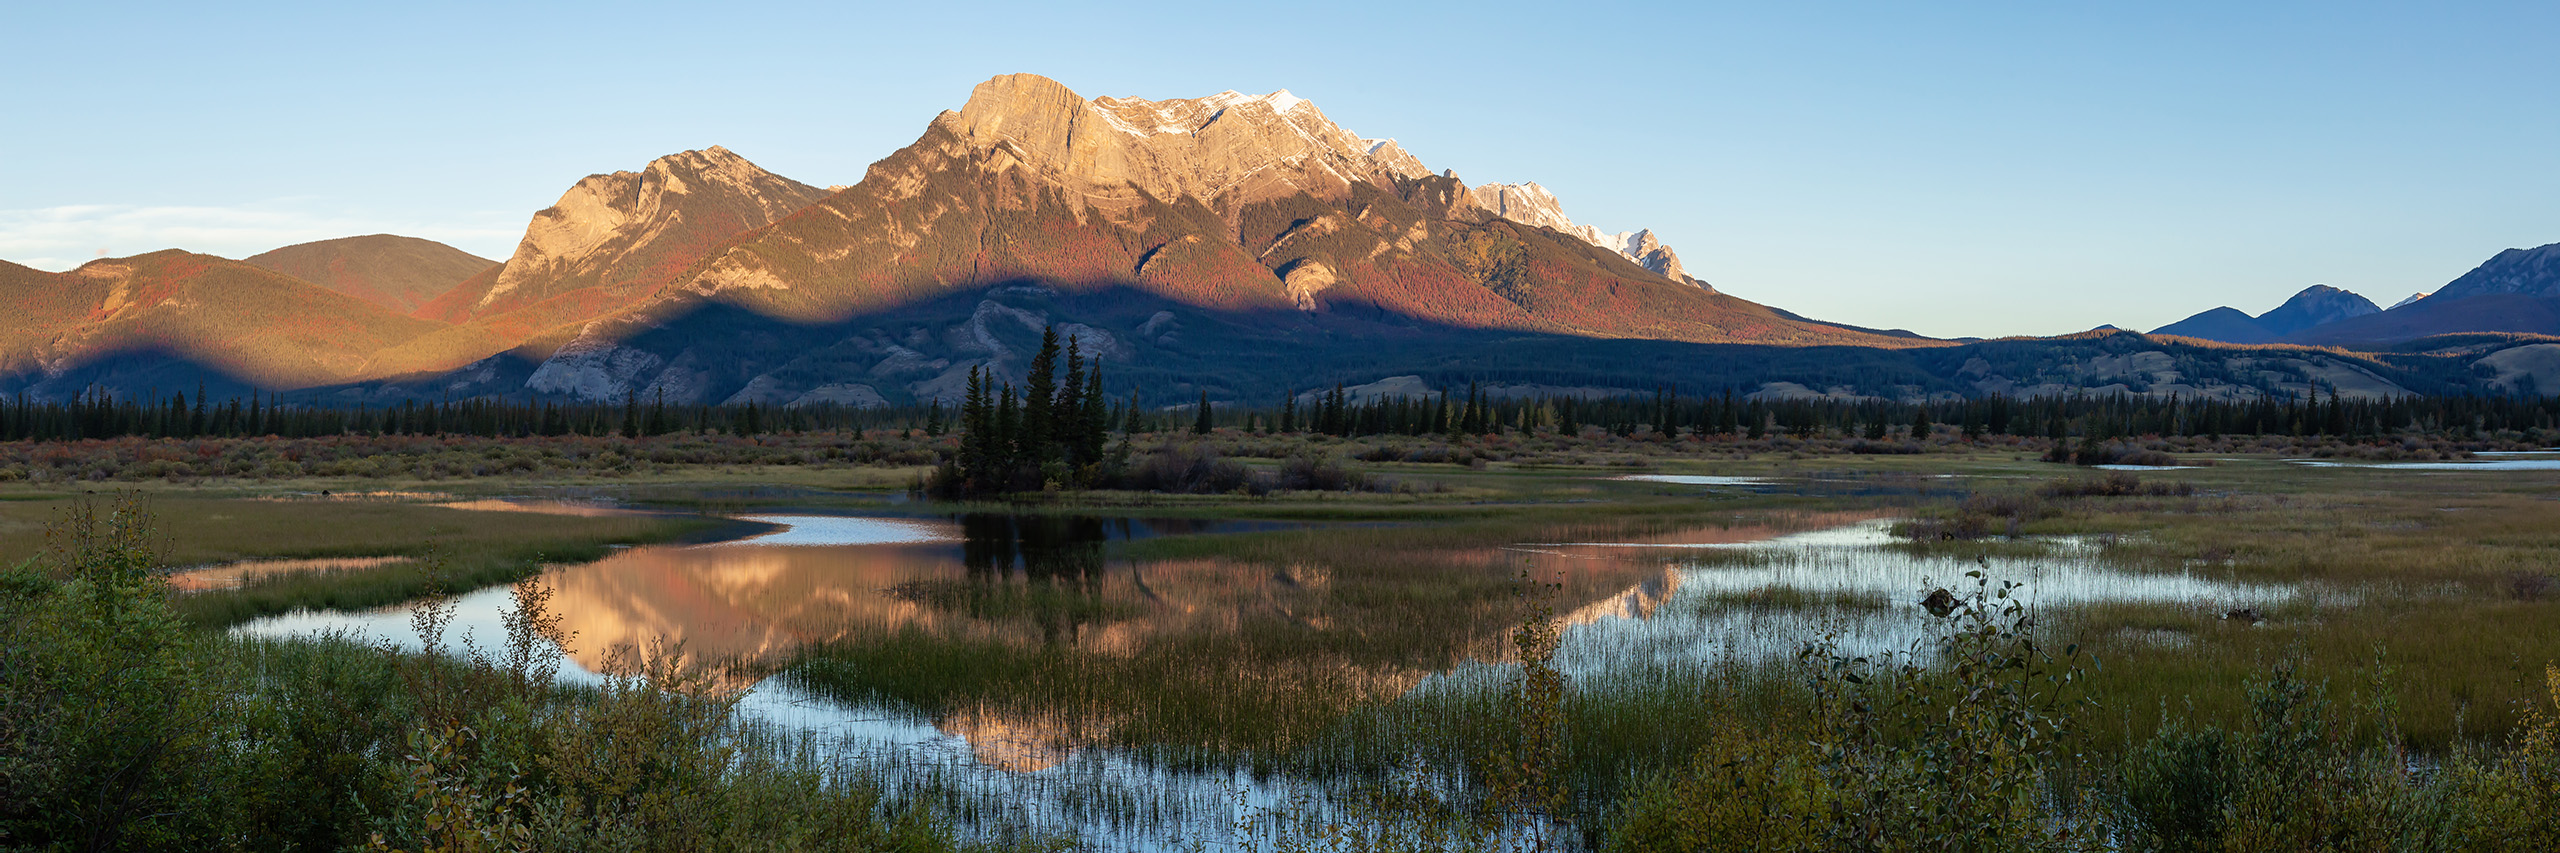 Panoramic landscape of the Canadian Rocky Mountains during a sunny sunrise.